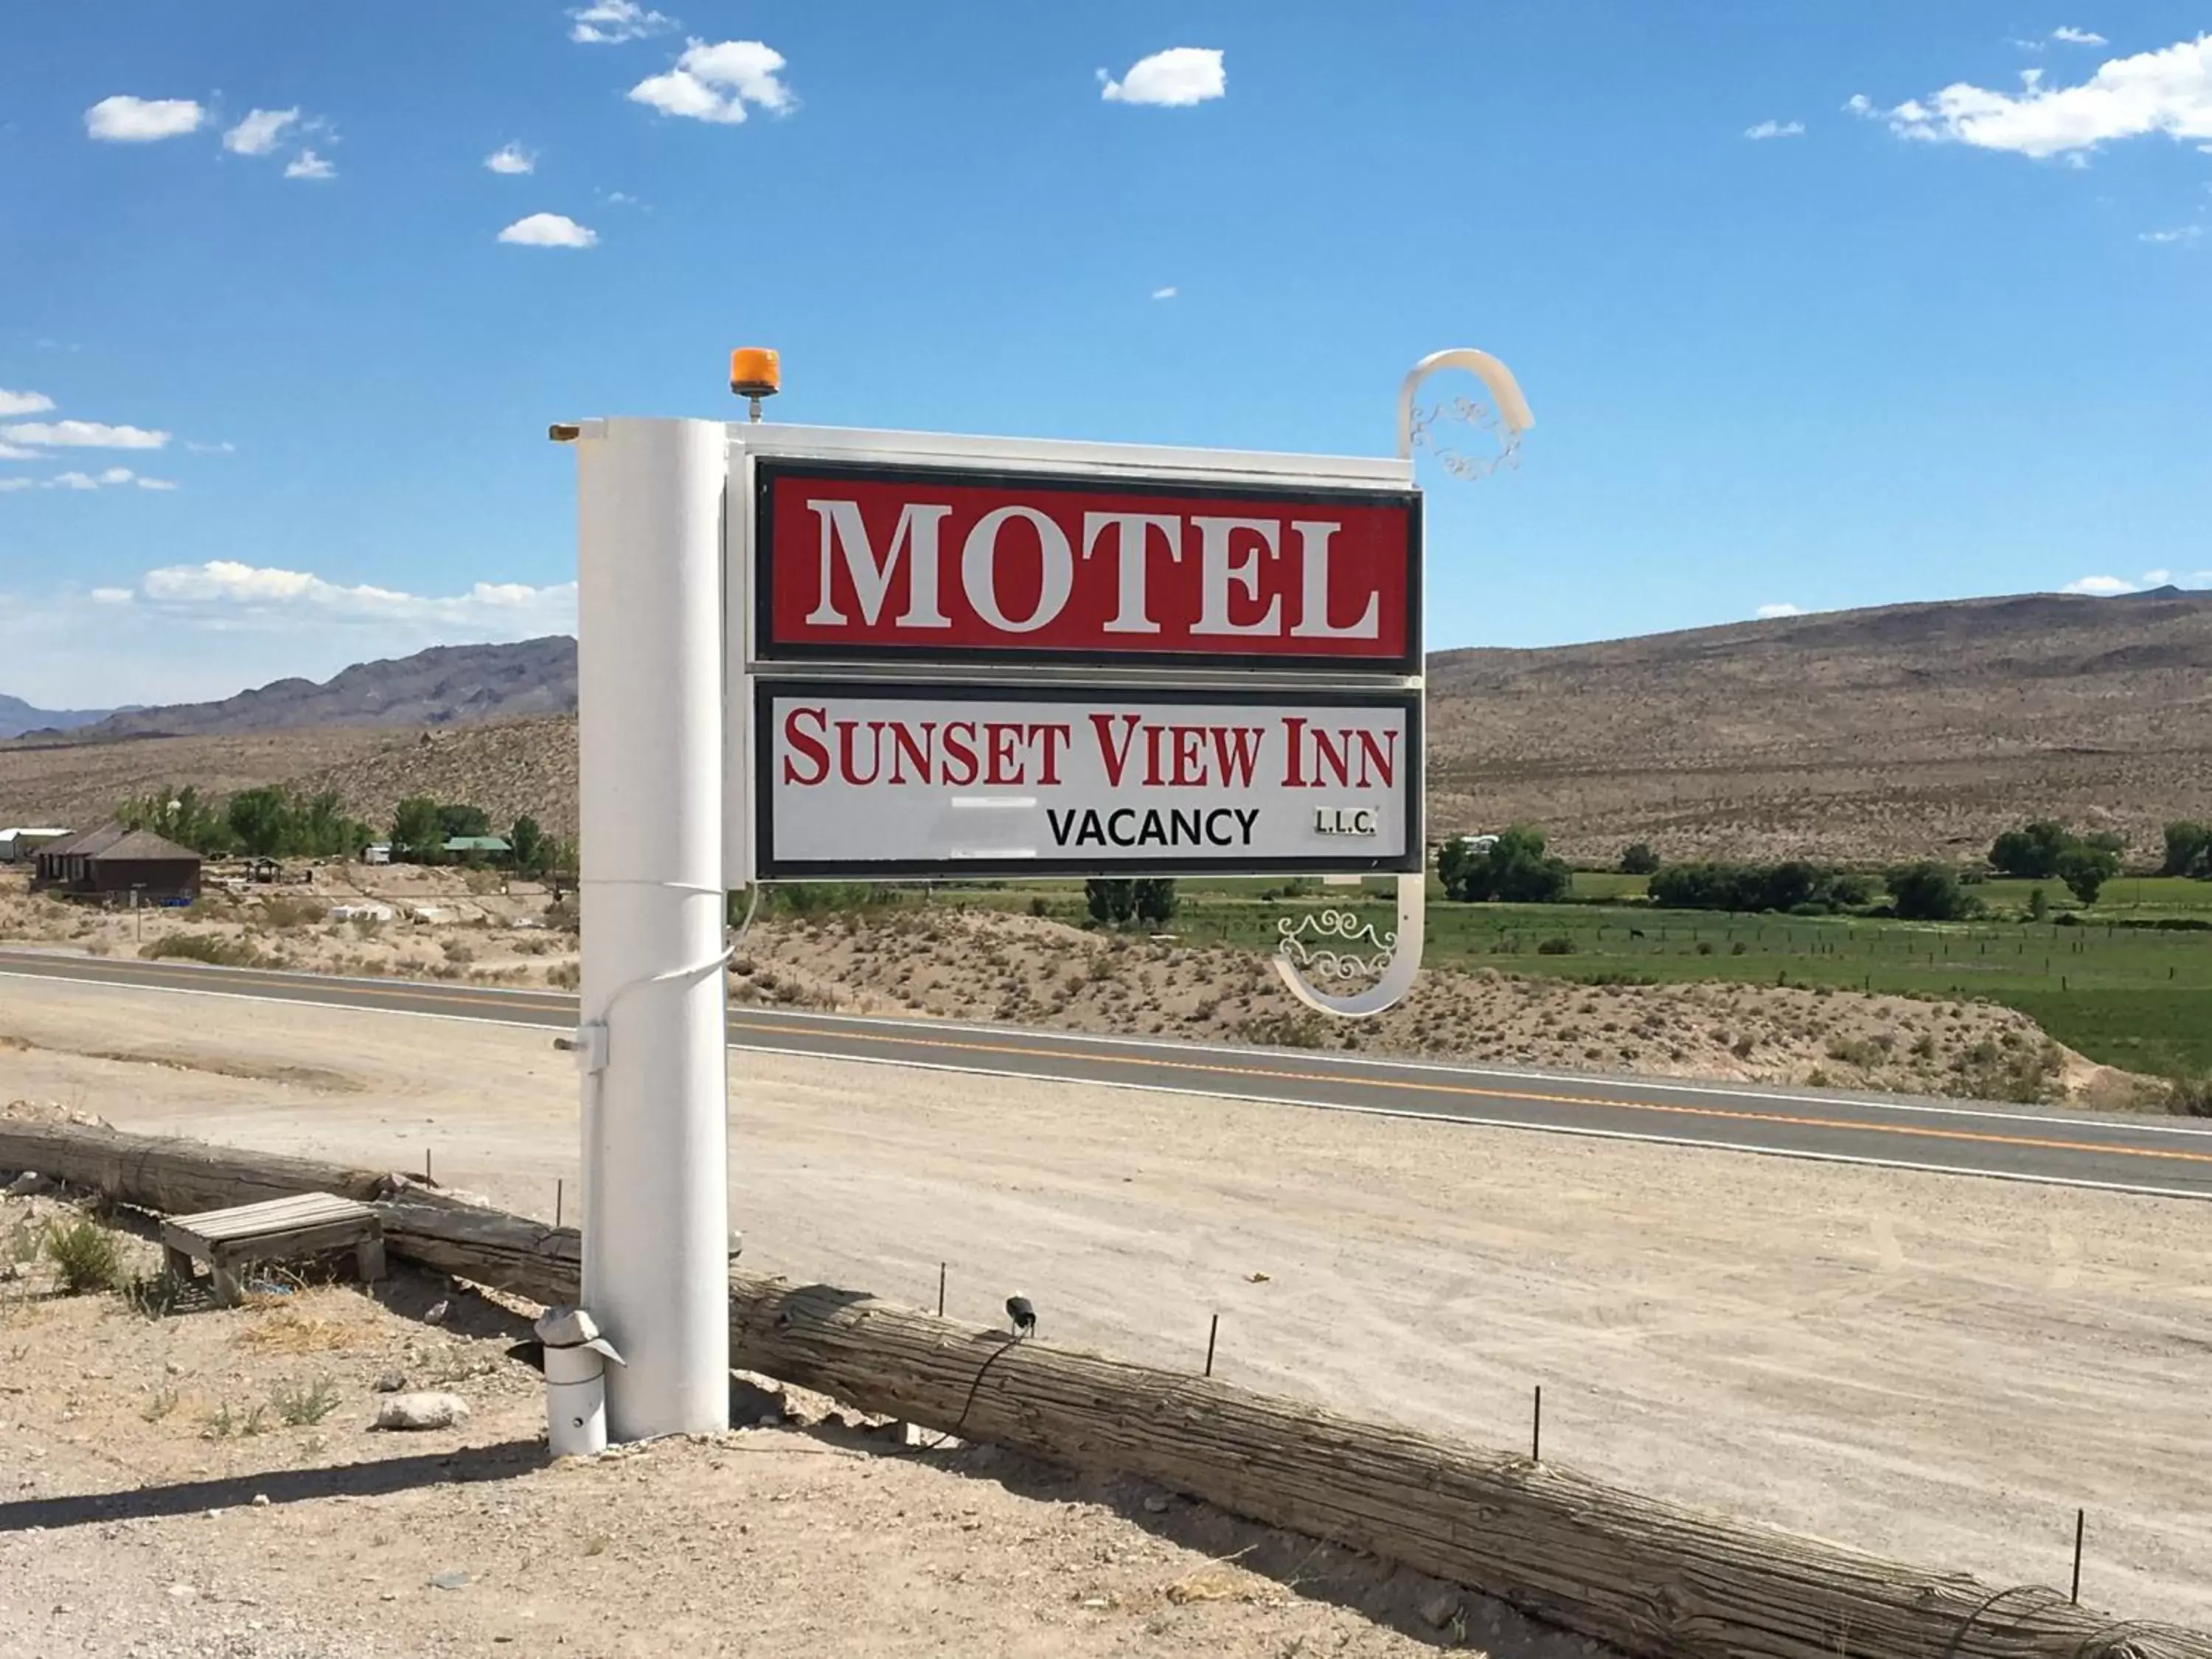 Property logo or sign in Sunset View Inn L.L.C